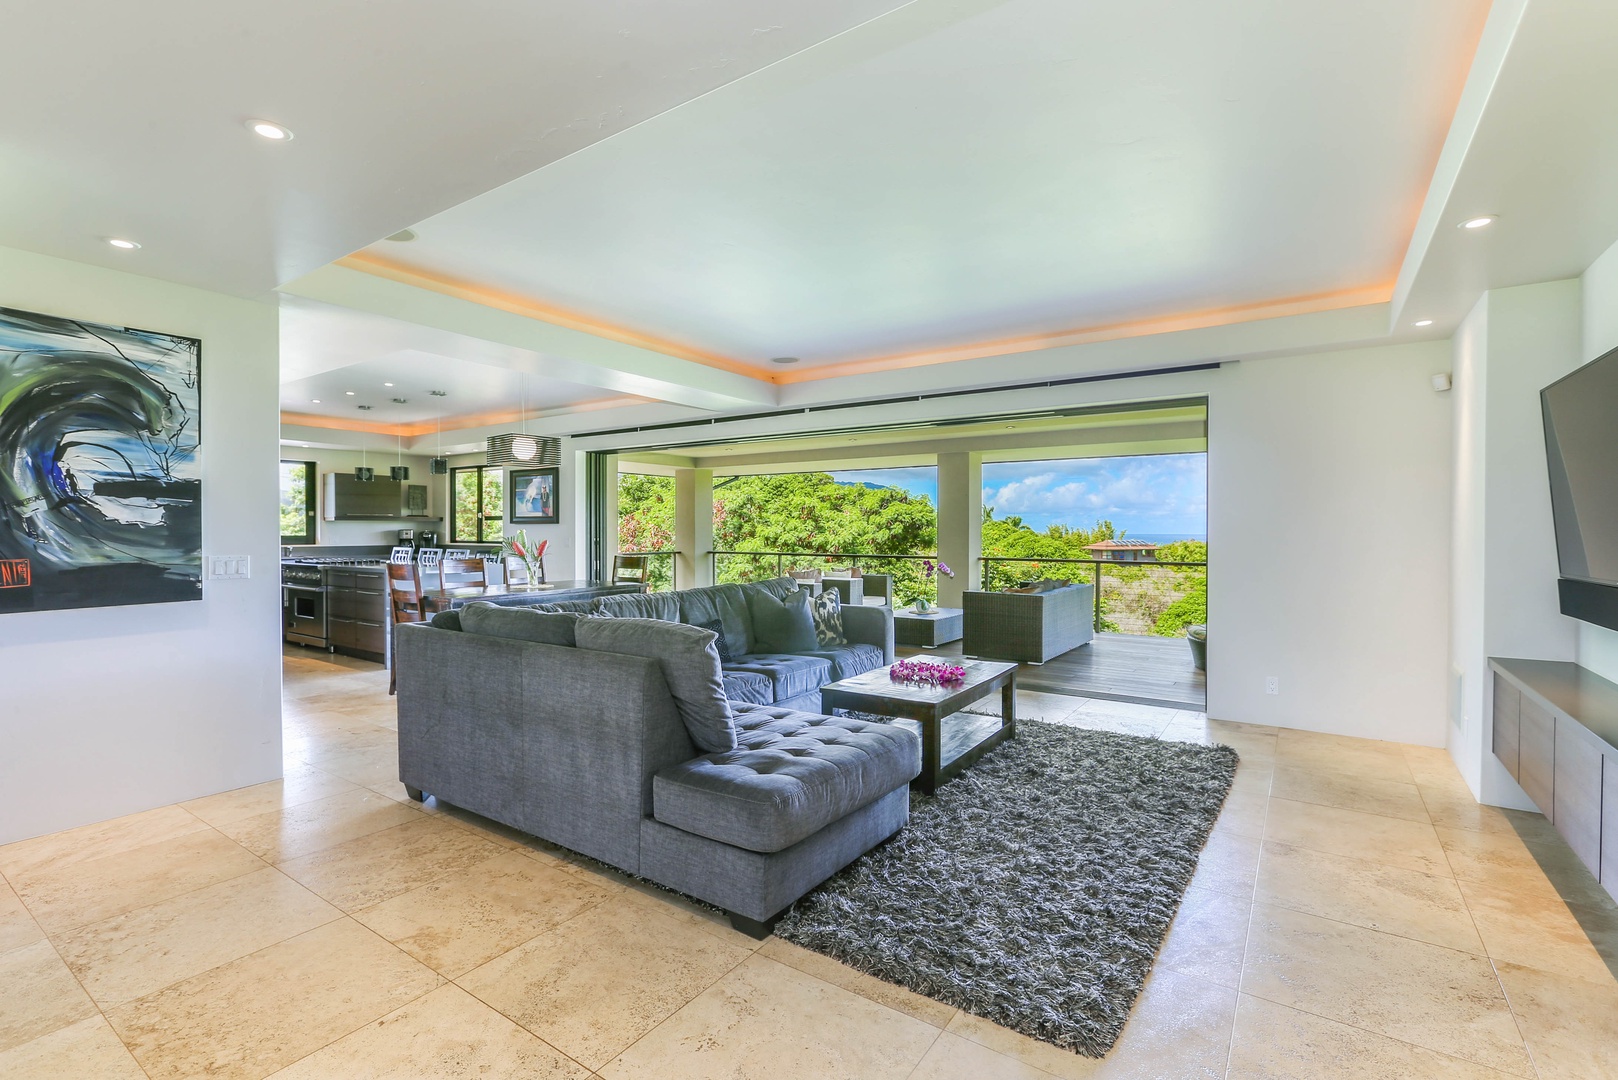 Princeville Vacation Rentals, Laulea Kailani Villa (KAUAI) - Enjoy the beautiful views from the comfort of the couch